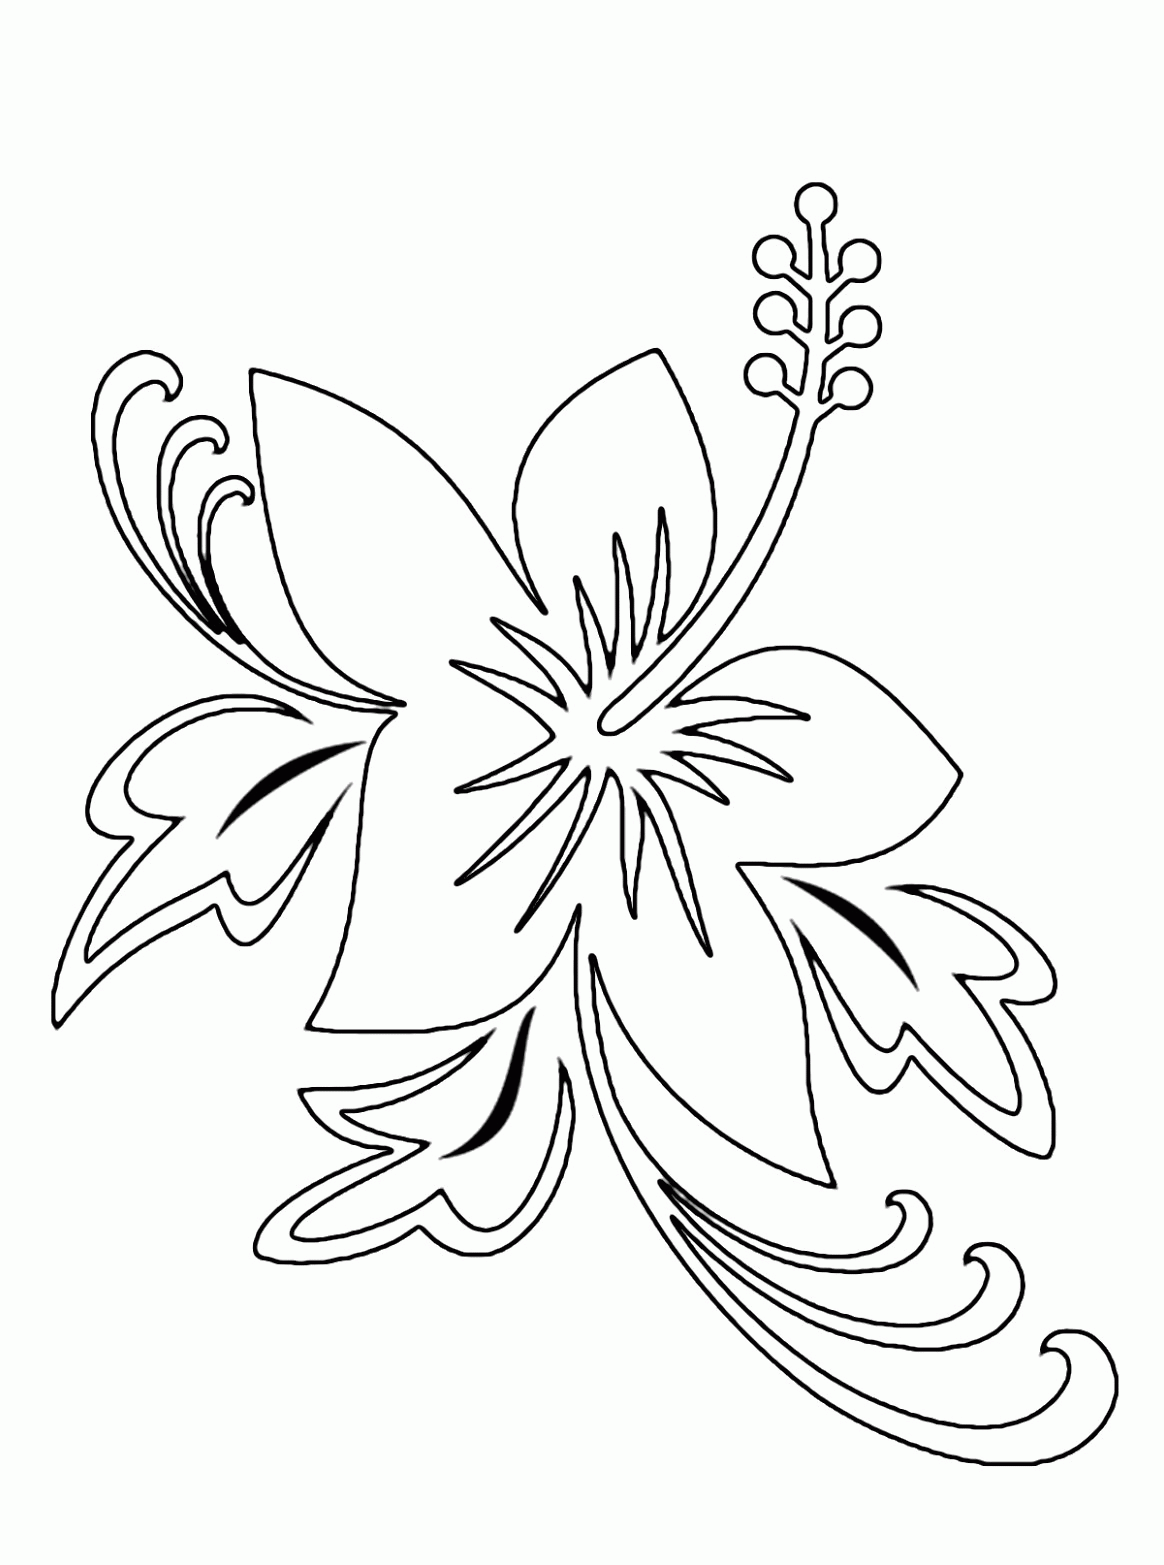 Coloring Pages of Hawaiian Tropical Forests | Best Coloring Page Site